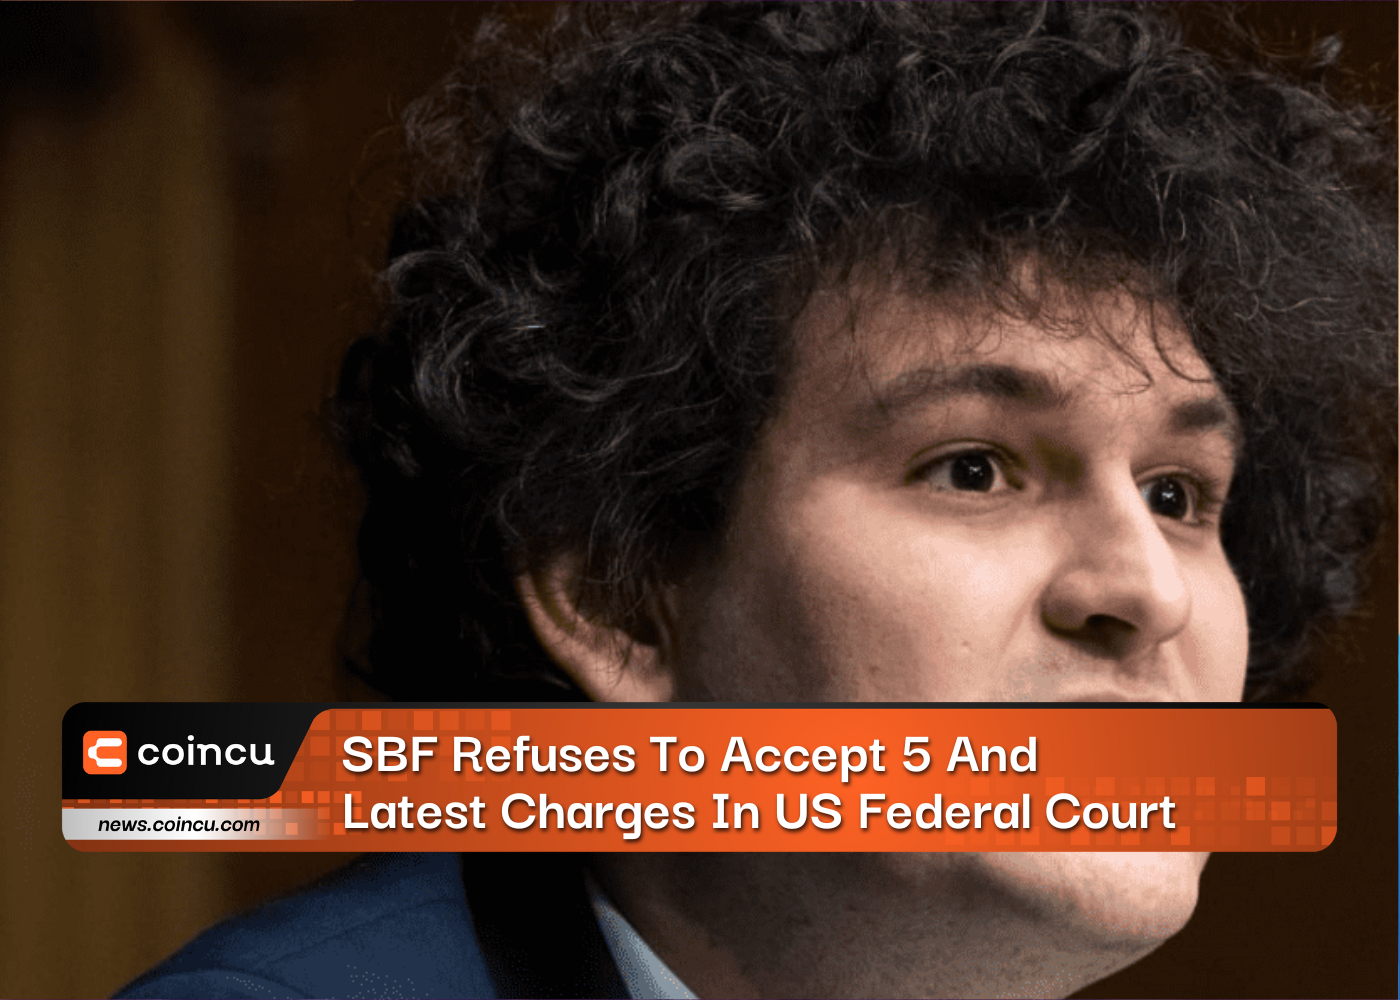 SBF Refuses To Accept 5 And Latest Charges In US Federal Court